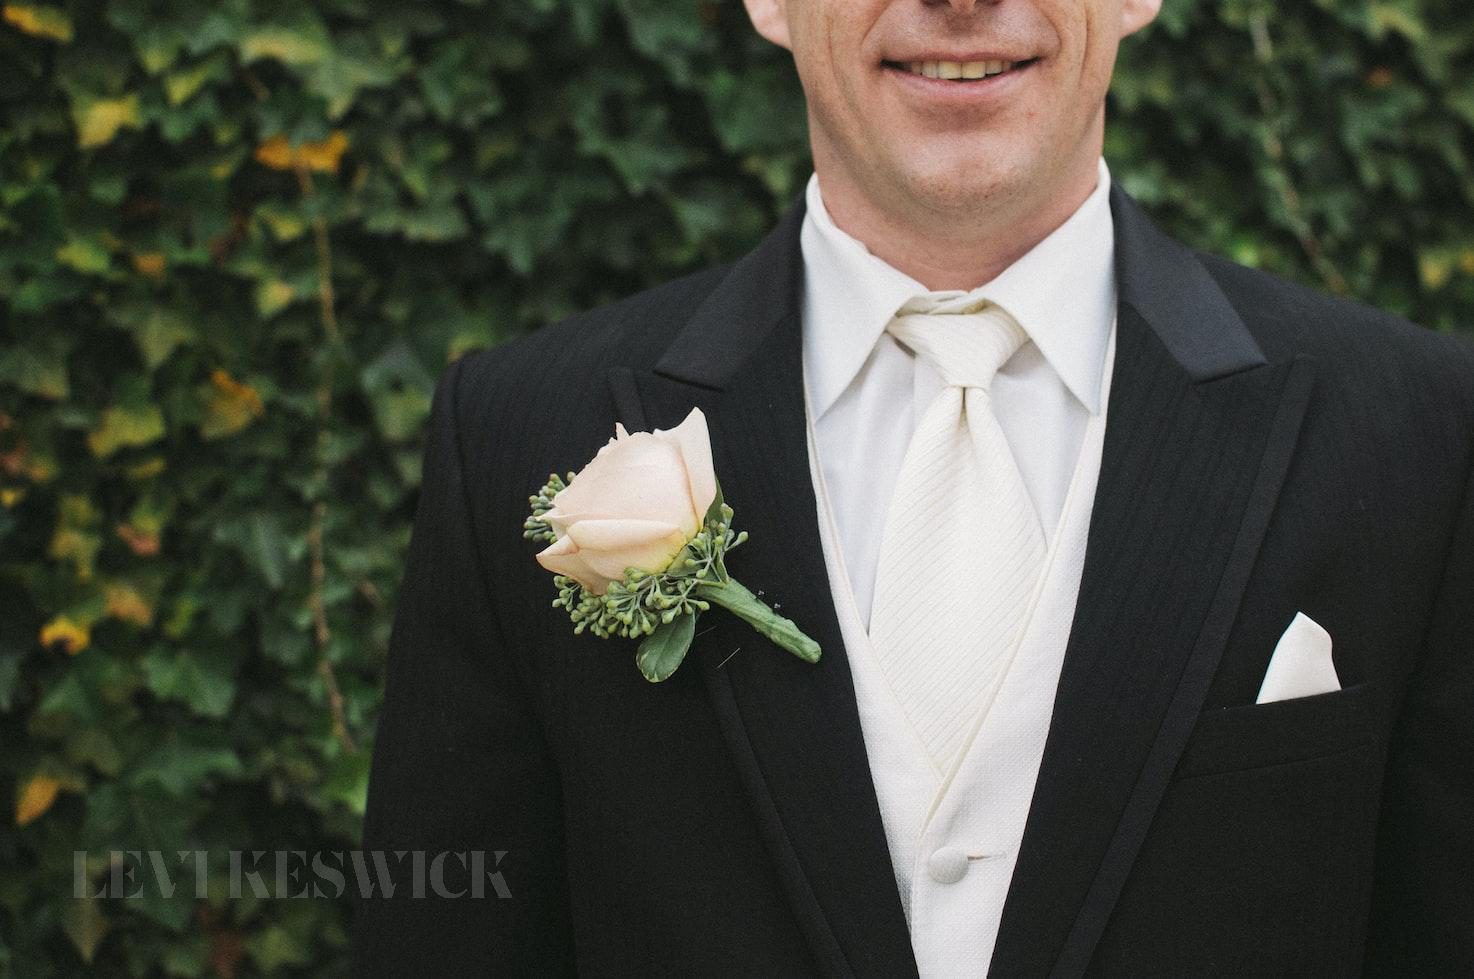 How To Pick A Wedding Tuxedo? These Useful Guidelines Will Help You